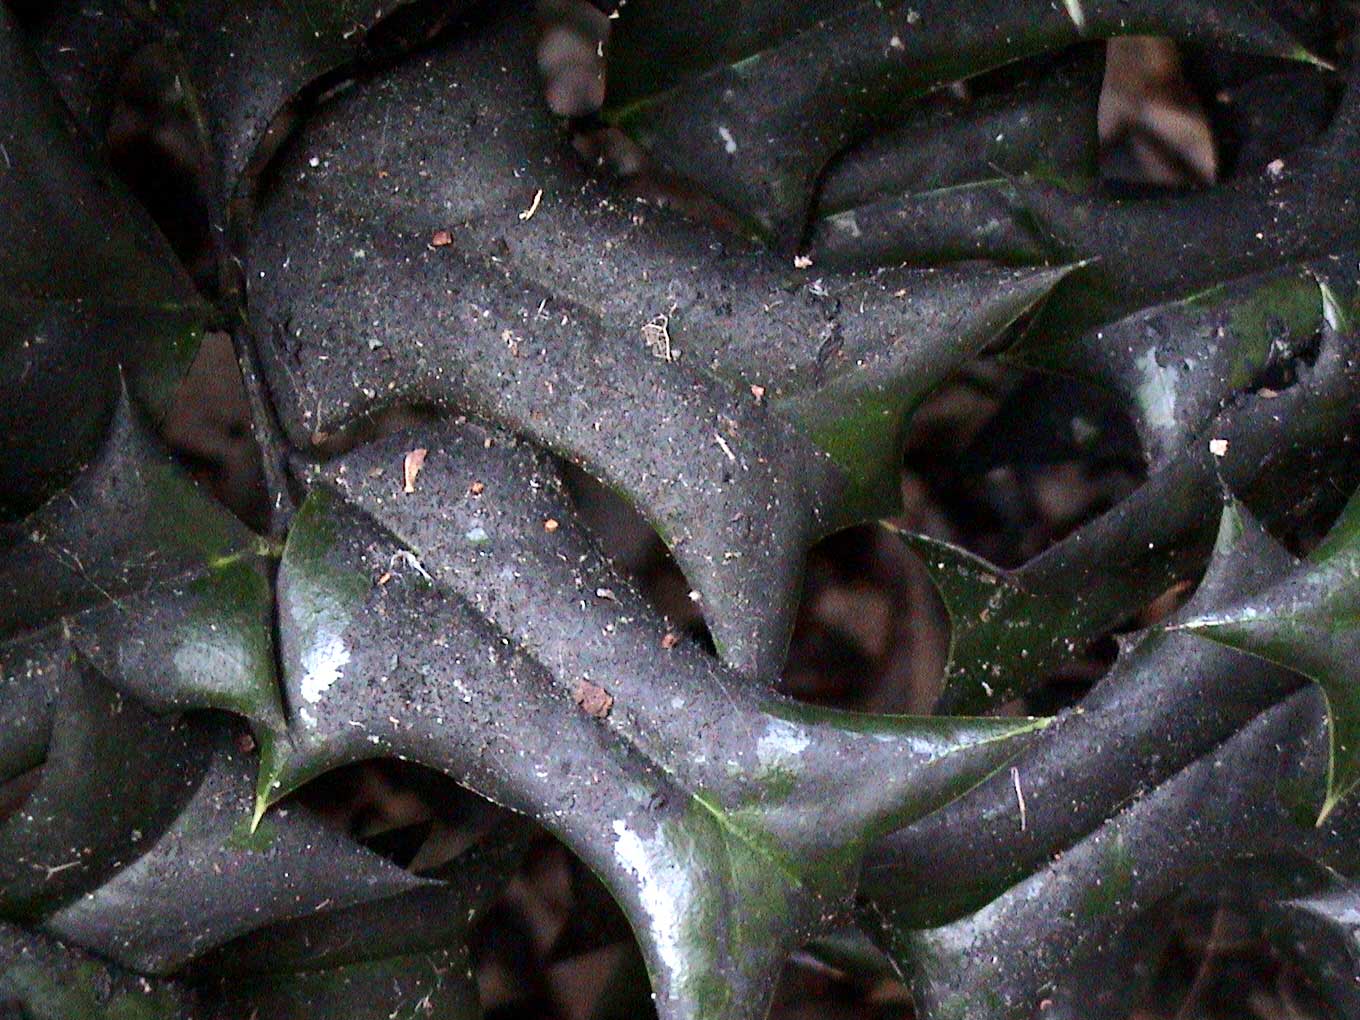 Figure 1. Sooty mold on holly in the early spring. Notice the flaking from the leaf.